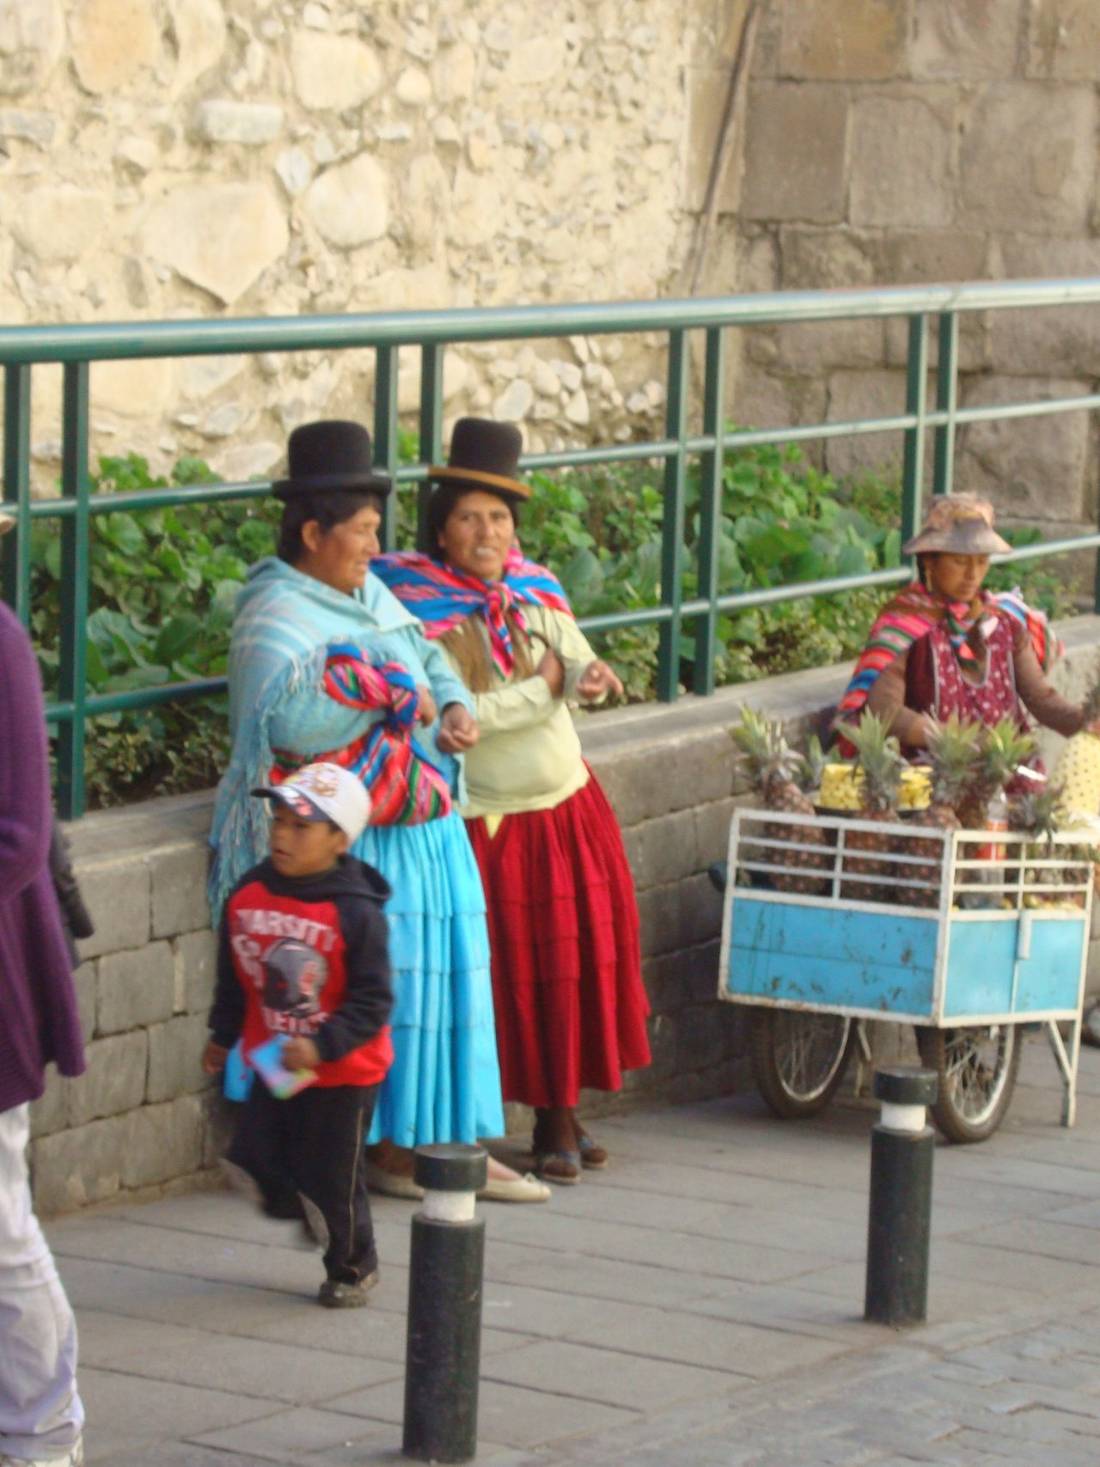 Cholas Paceñas/Typical bolivian woman